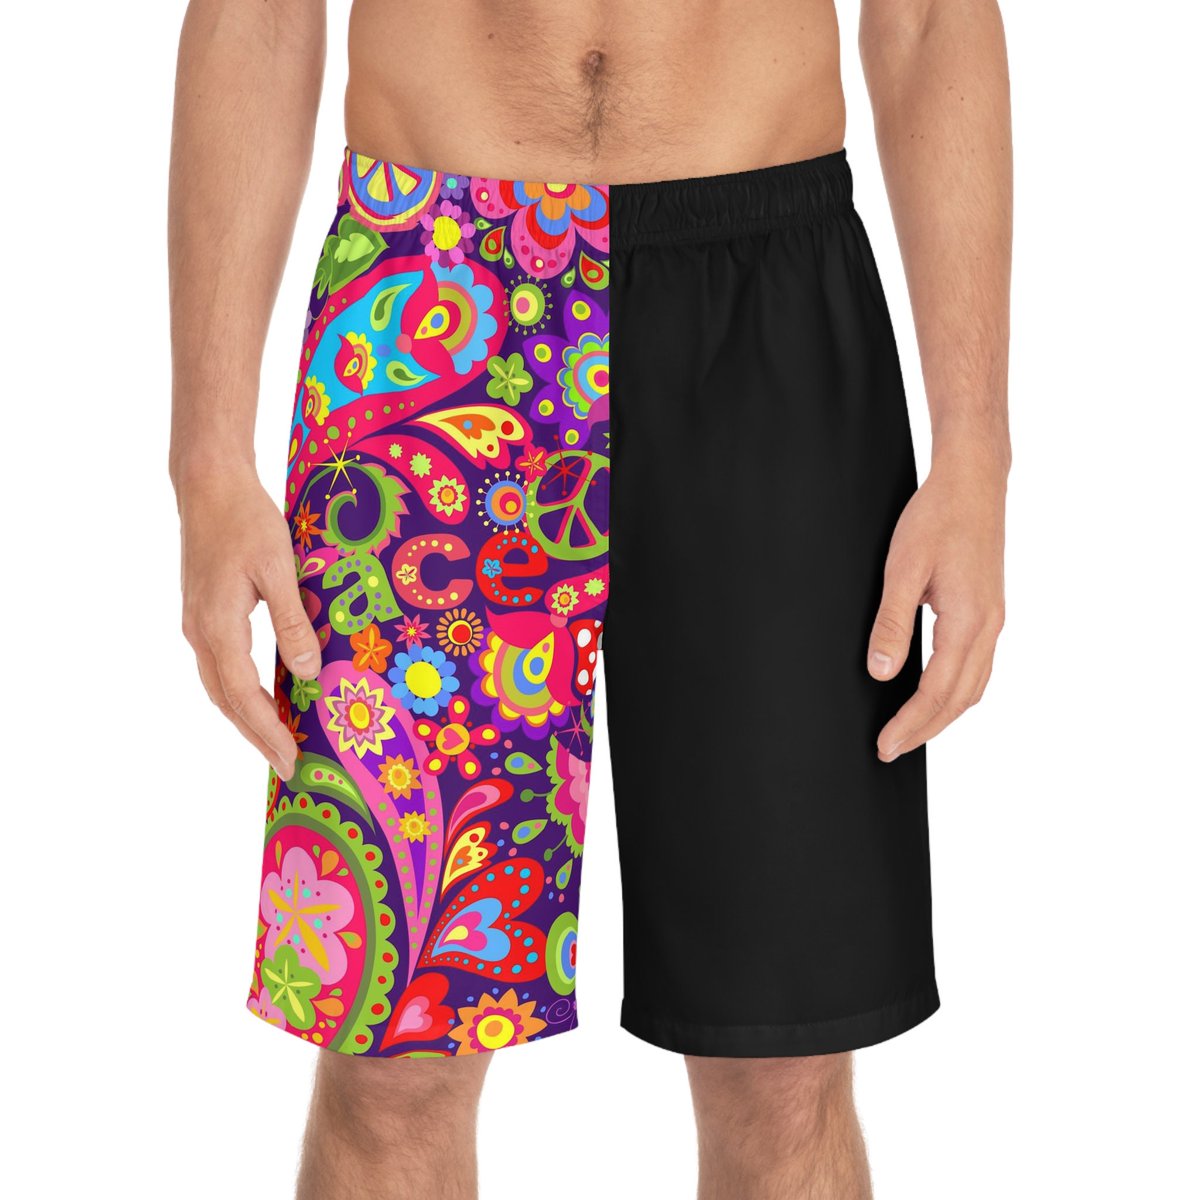 Excited to share the latest addition to my #etsy shop: Floral Peace Paisley Men's Board Shorts: Featured in Our Brazilian Swimwear Sale - Make a Splash with Our Stylish Summer Beachwear etsy.me/42J63NG #floralpeacepaisley #mensboardshorts #brazilianswimwear #sw